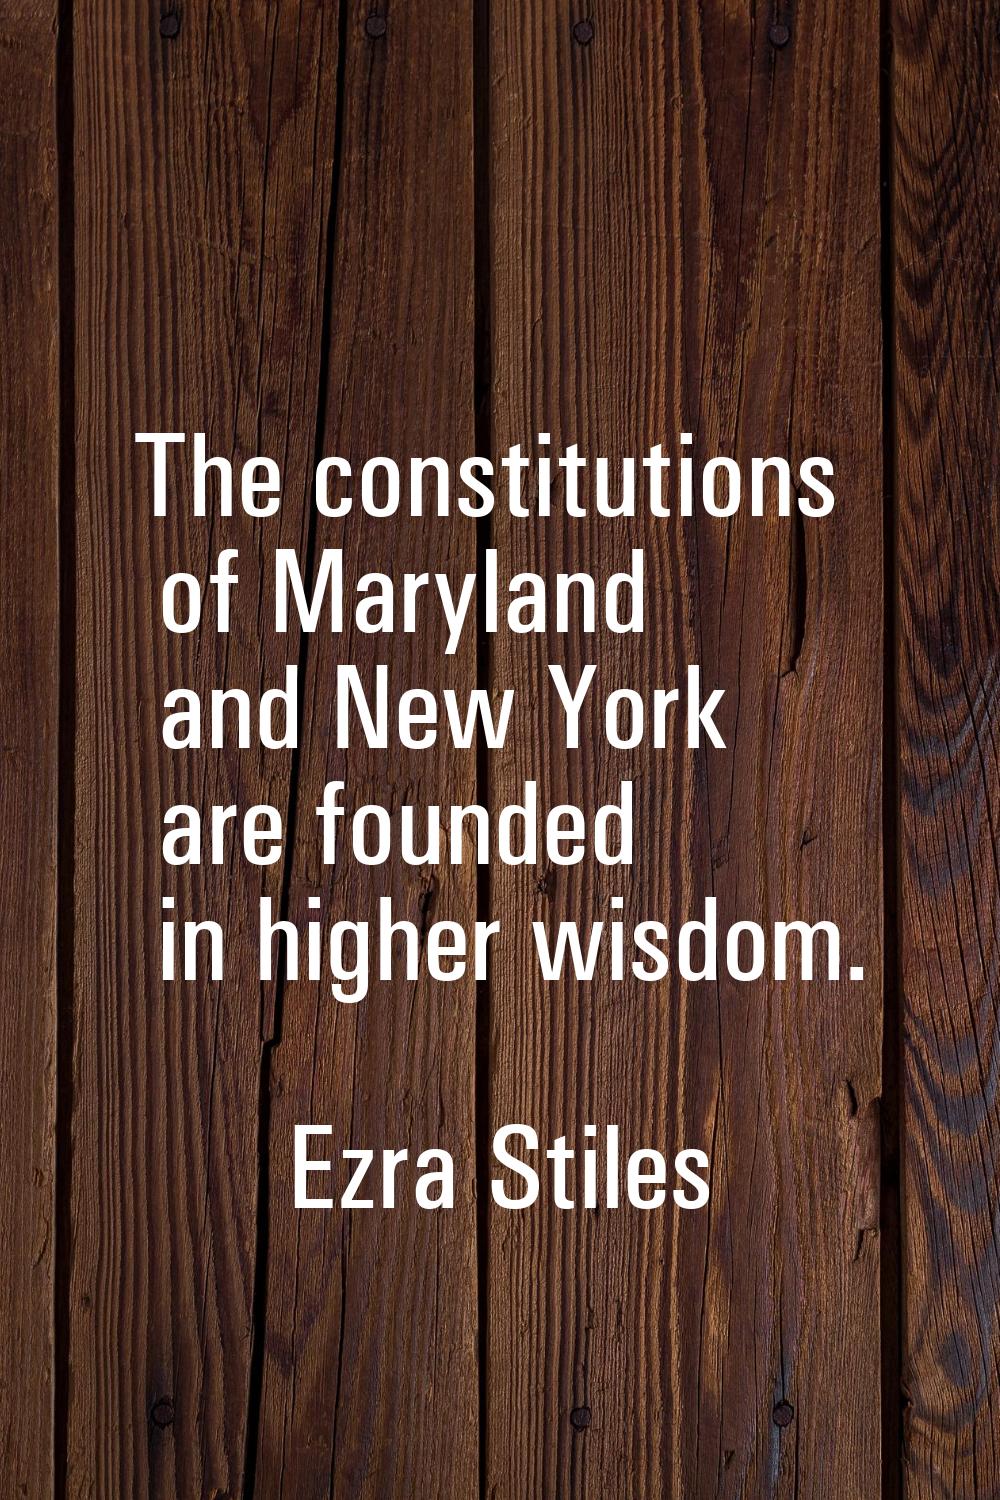 The constitutions of Maryland and New York are founded in higher wisdom.